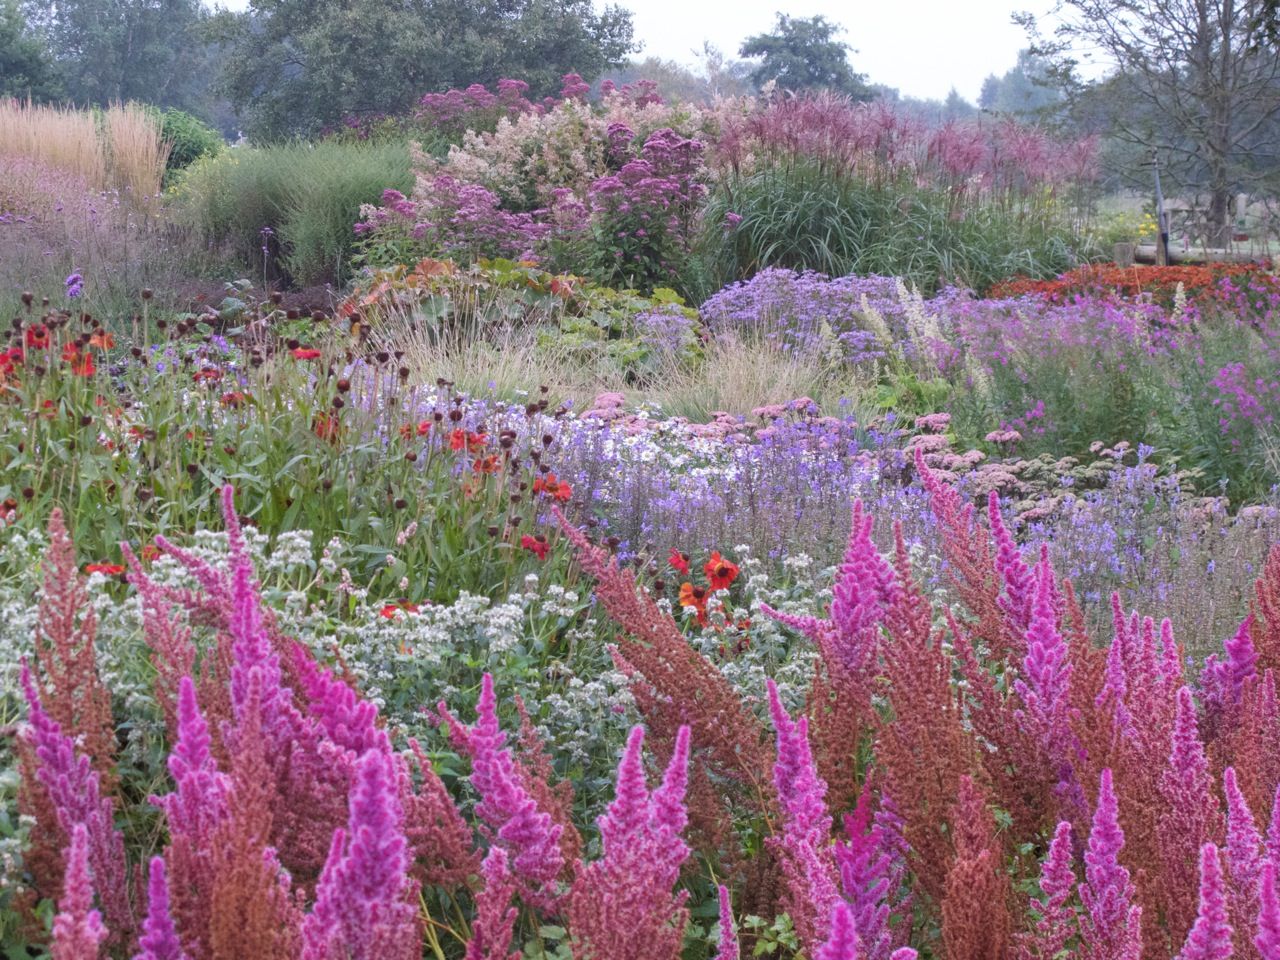 Naturalistic Planting Still A Firm Favourite Two Decades On